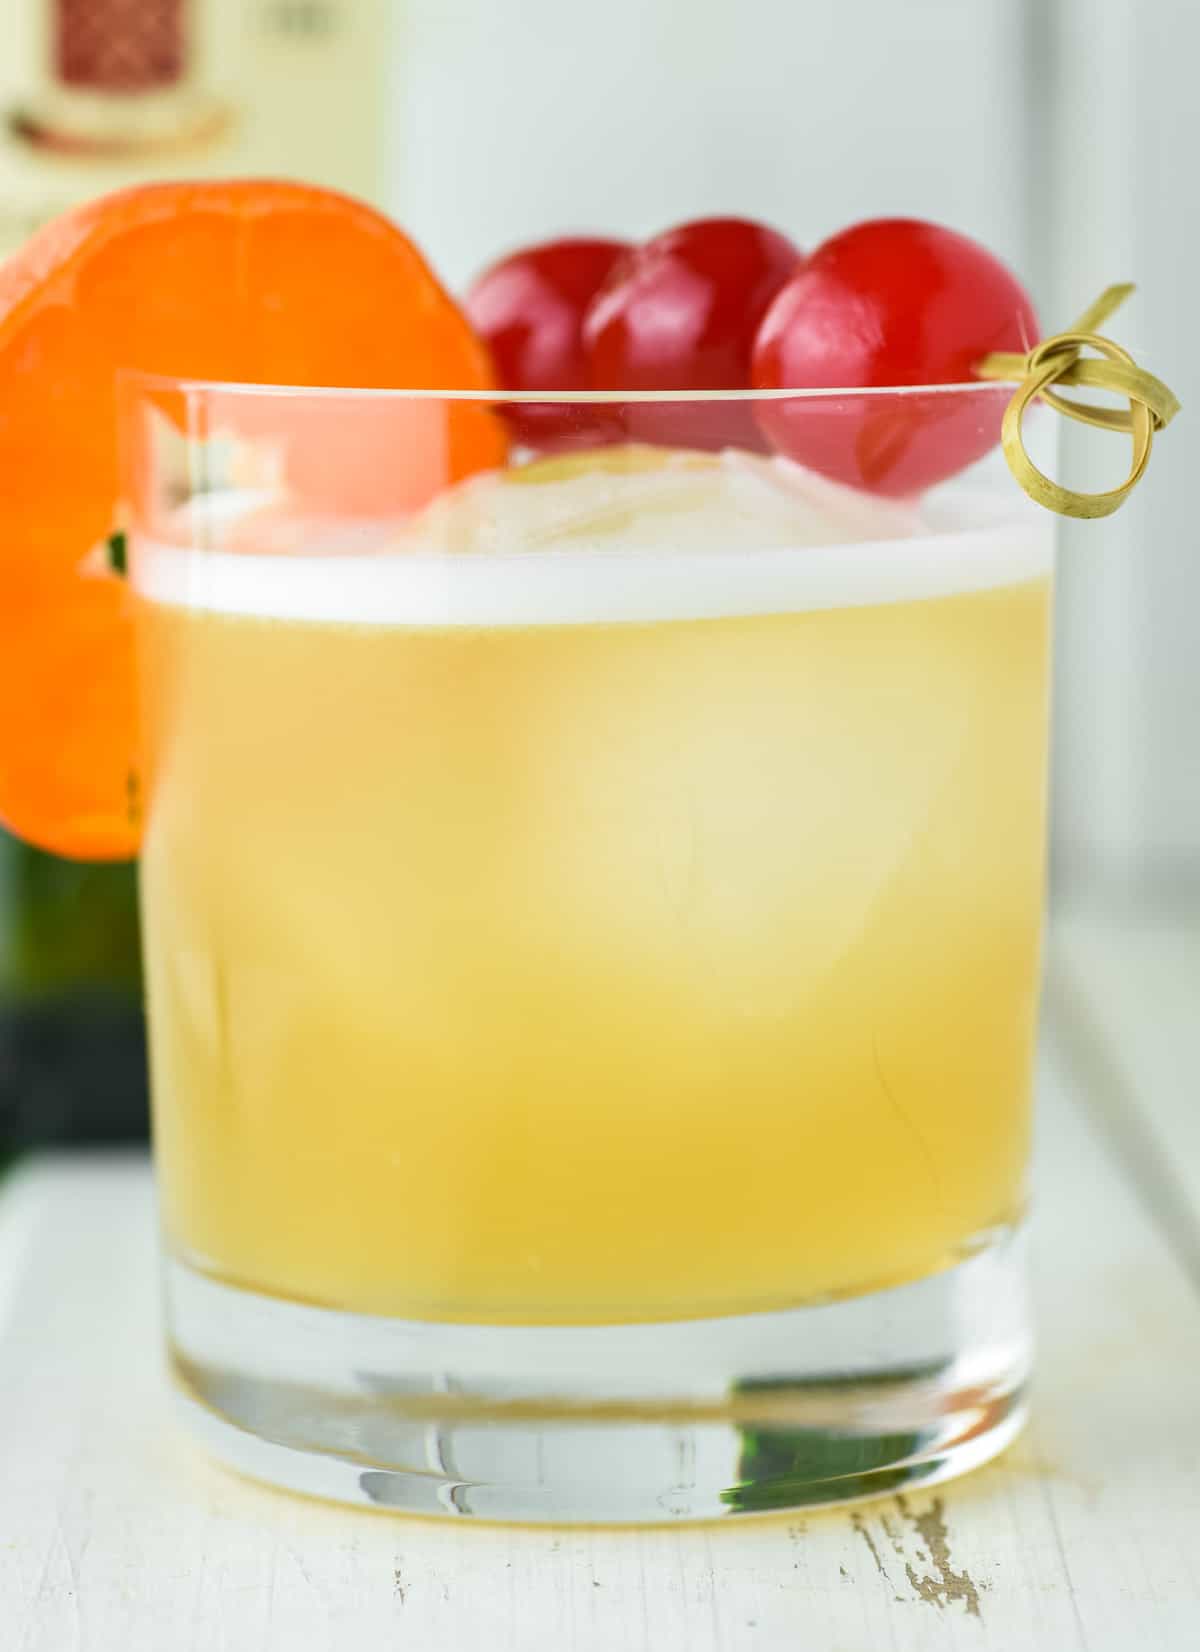 old fashioned glass of Jameson whiskey sour with cherries and orange slice as garnish